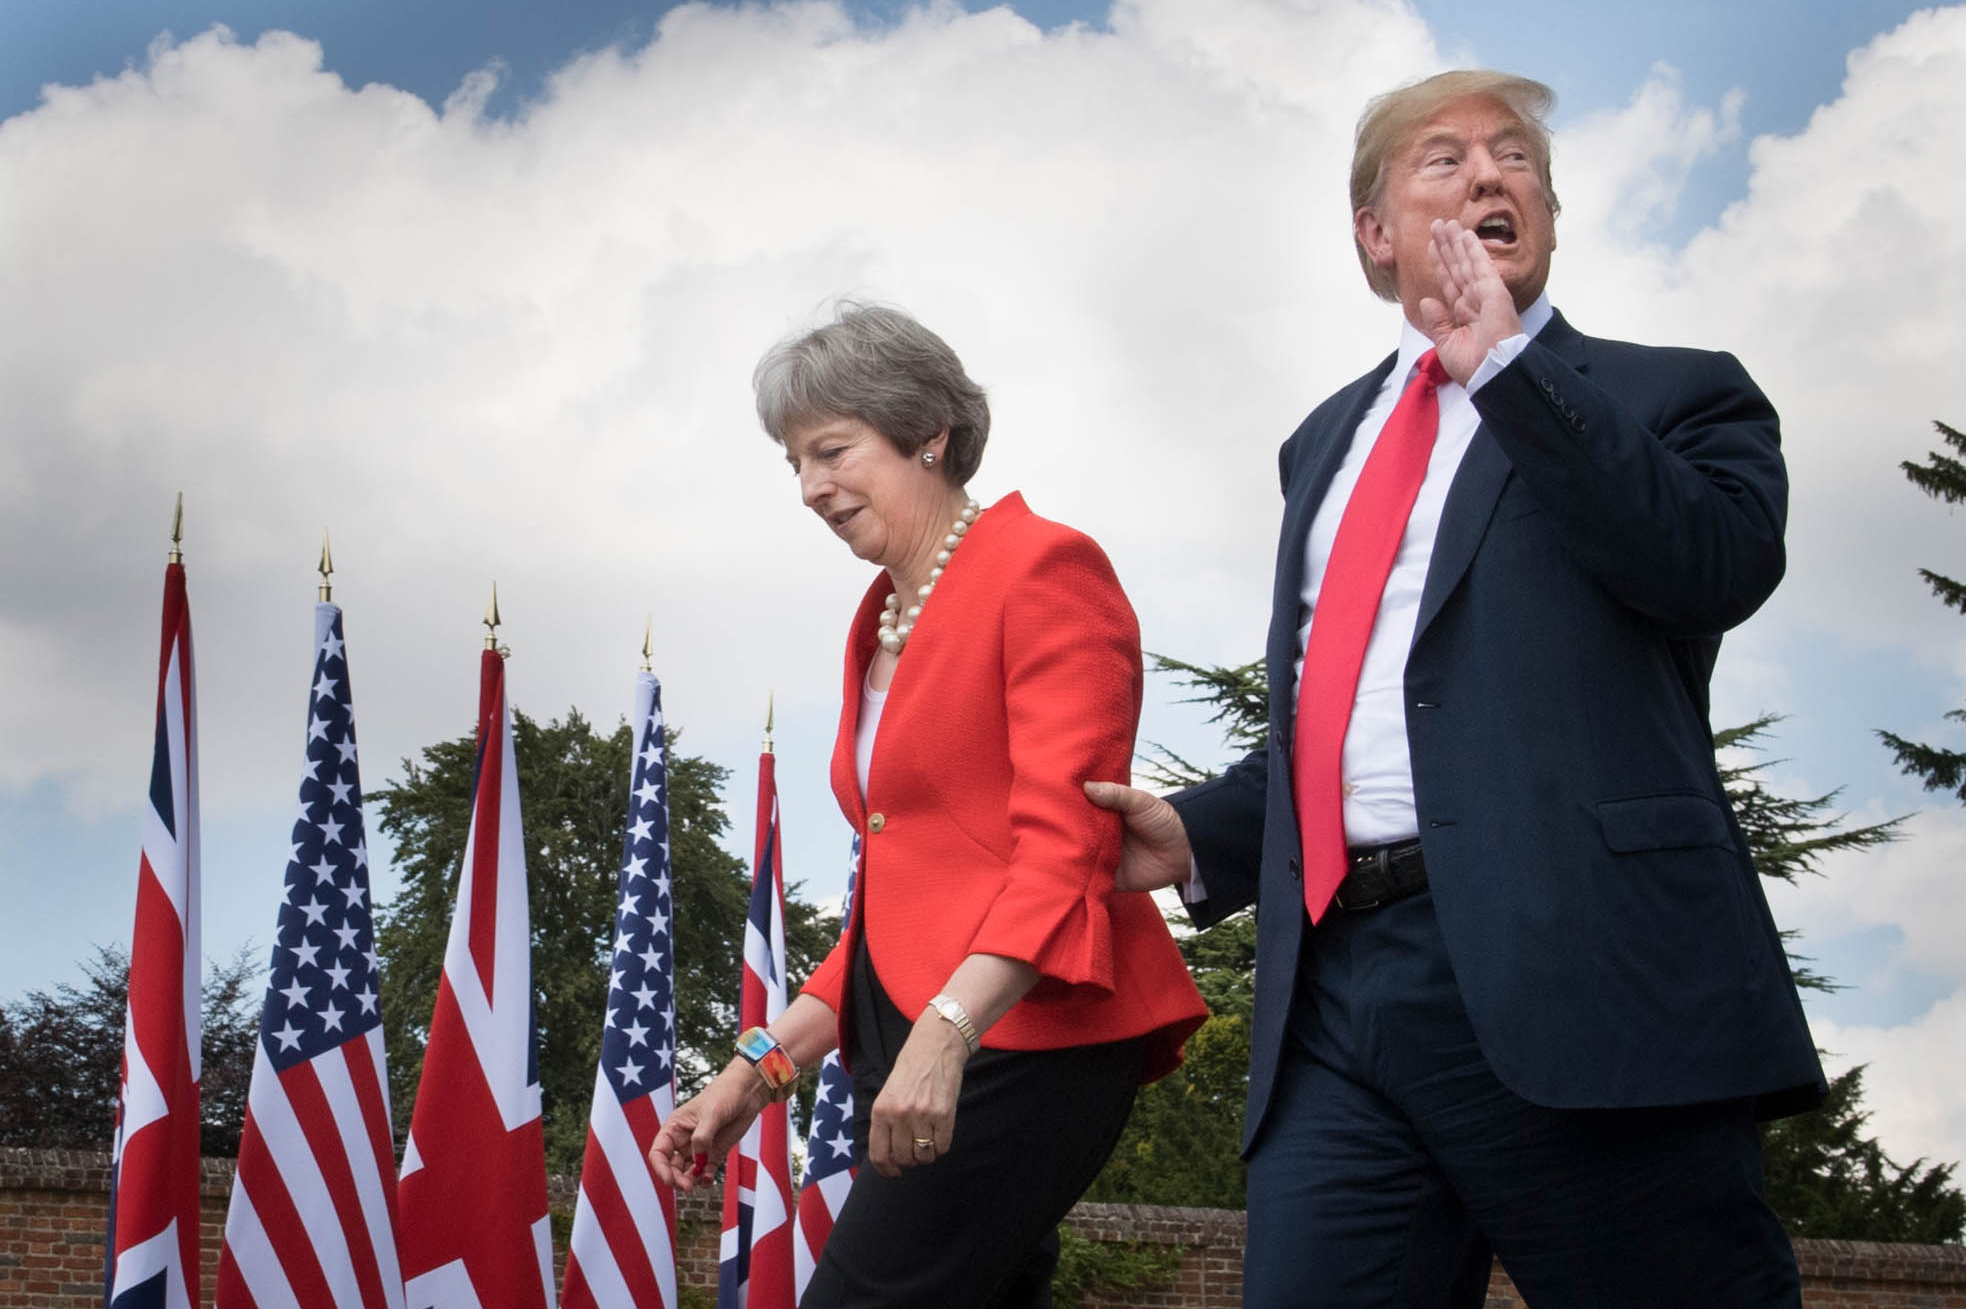  British Prime Minister Theresa May and U.S. President Donald Trump leave a press conference at Chequers in Buckinghamshire where they held earlier bilateral meetings. 
Photo by Stefan Rousseau, 13 July 2018
 